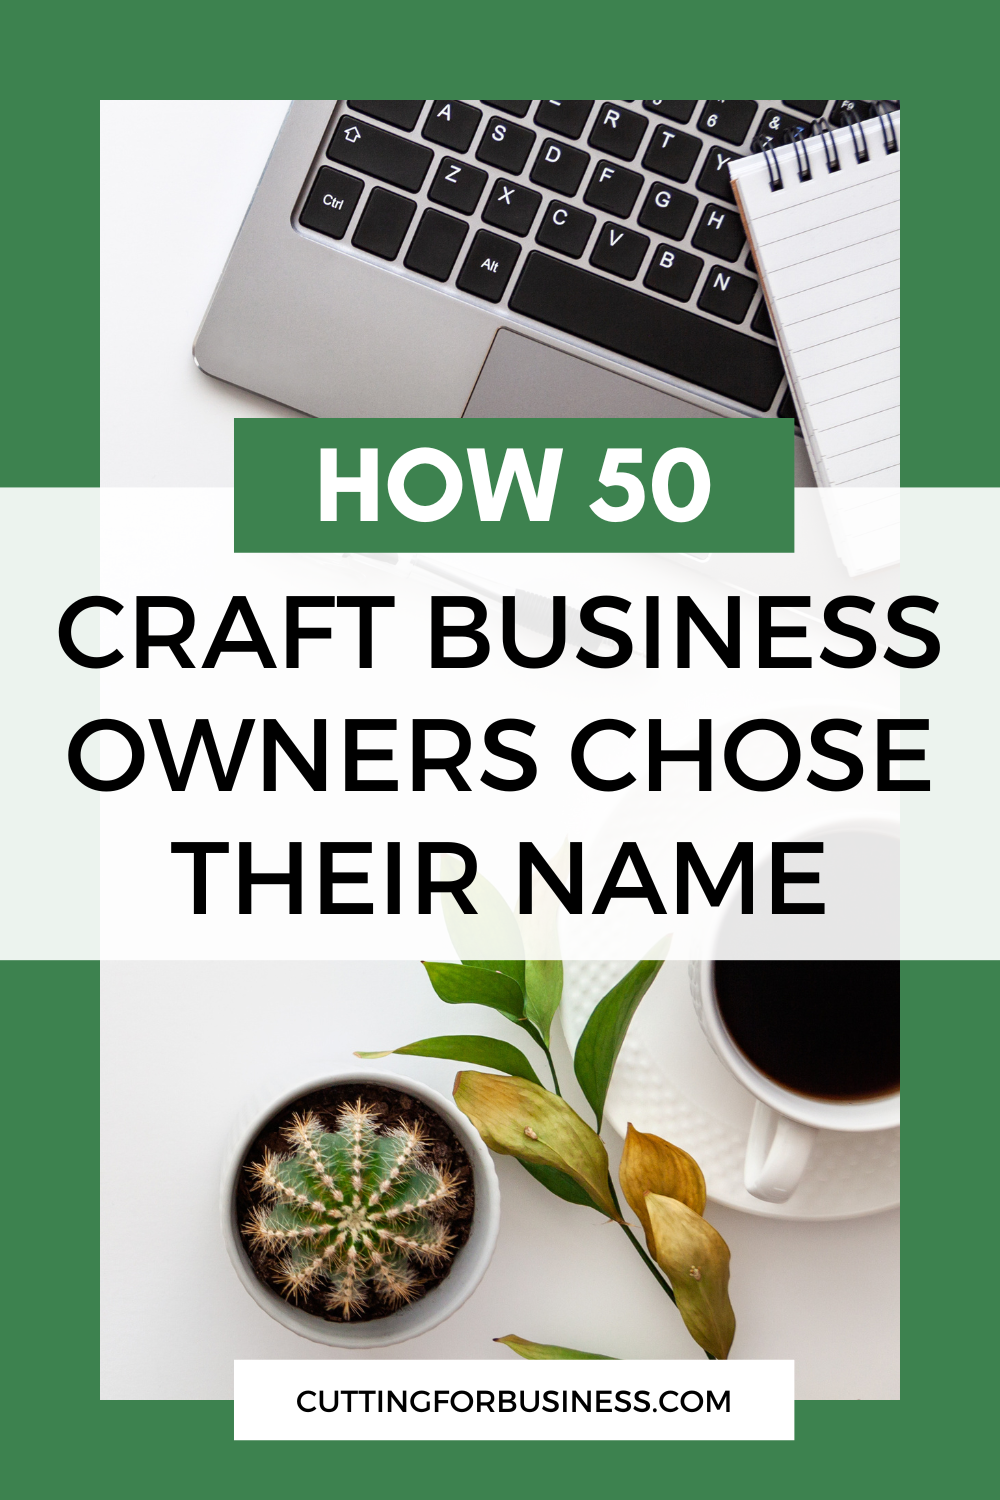 How 50 Craft Business Owners Chose Their Business Name - cuttingforbusiness.com.